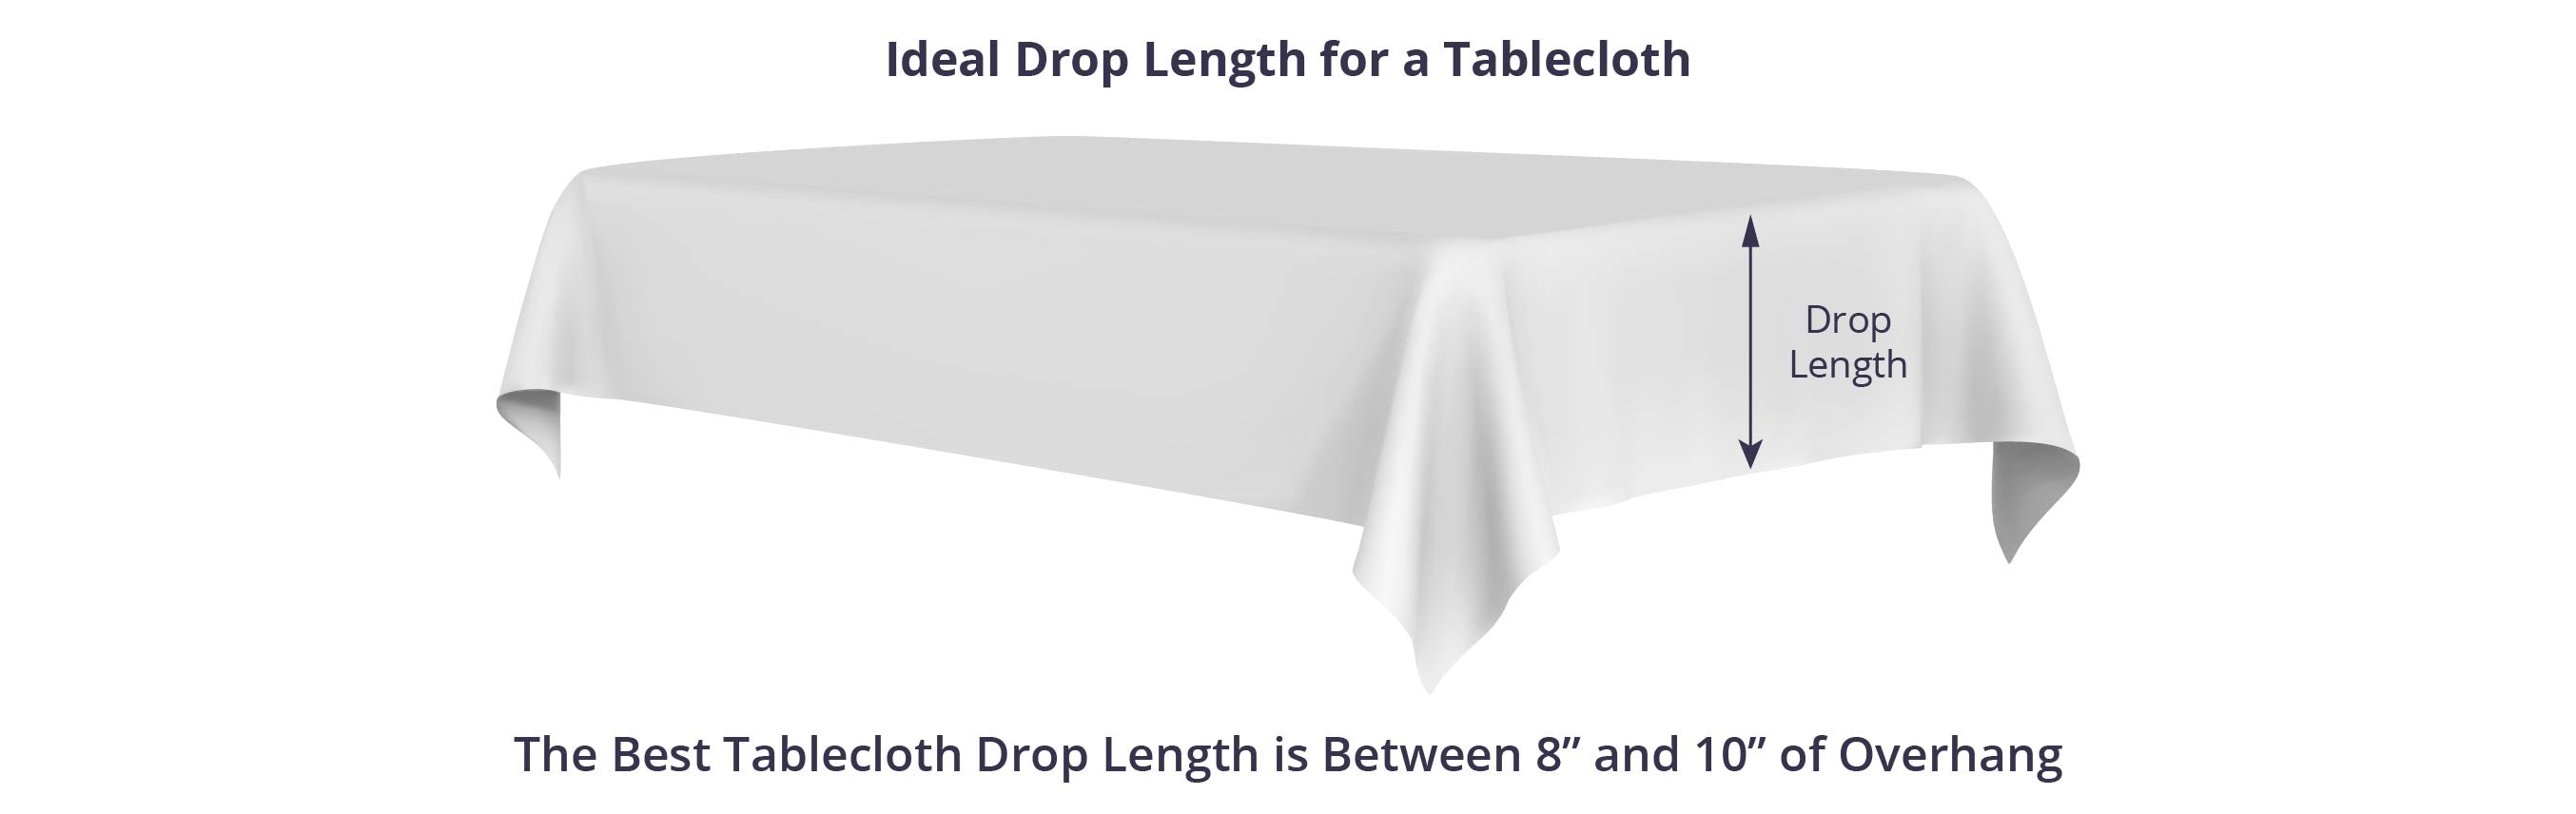 Ideal Drop Length for a Tablecloth